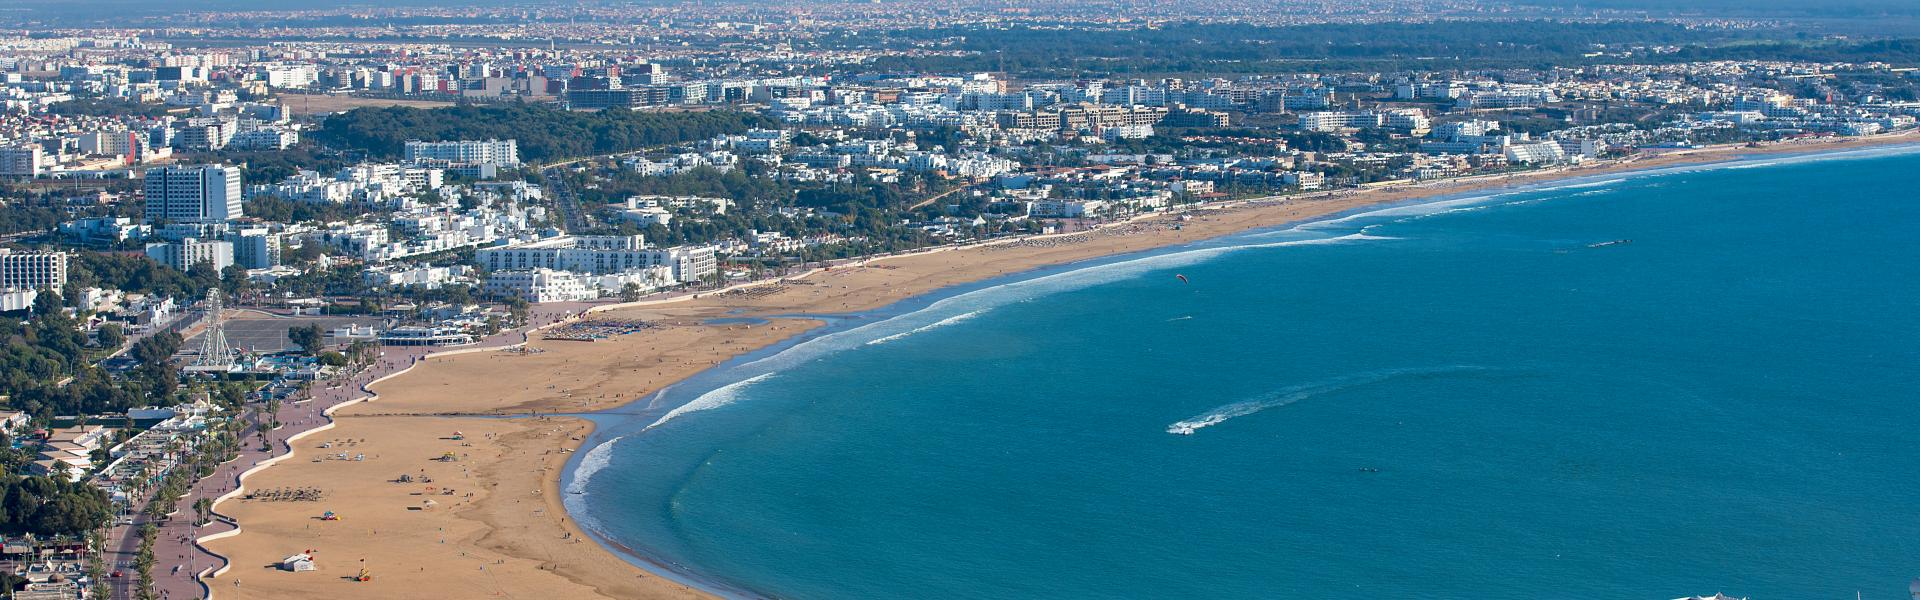 Find the perfect vacation home in Agadir - Casamundo